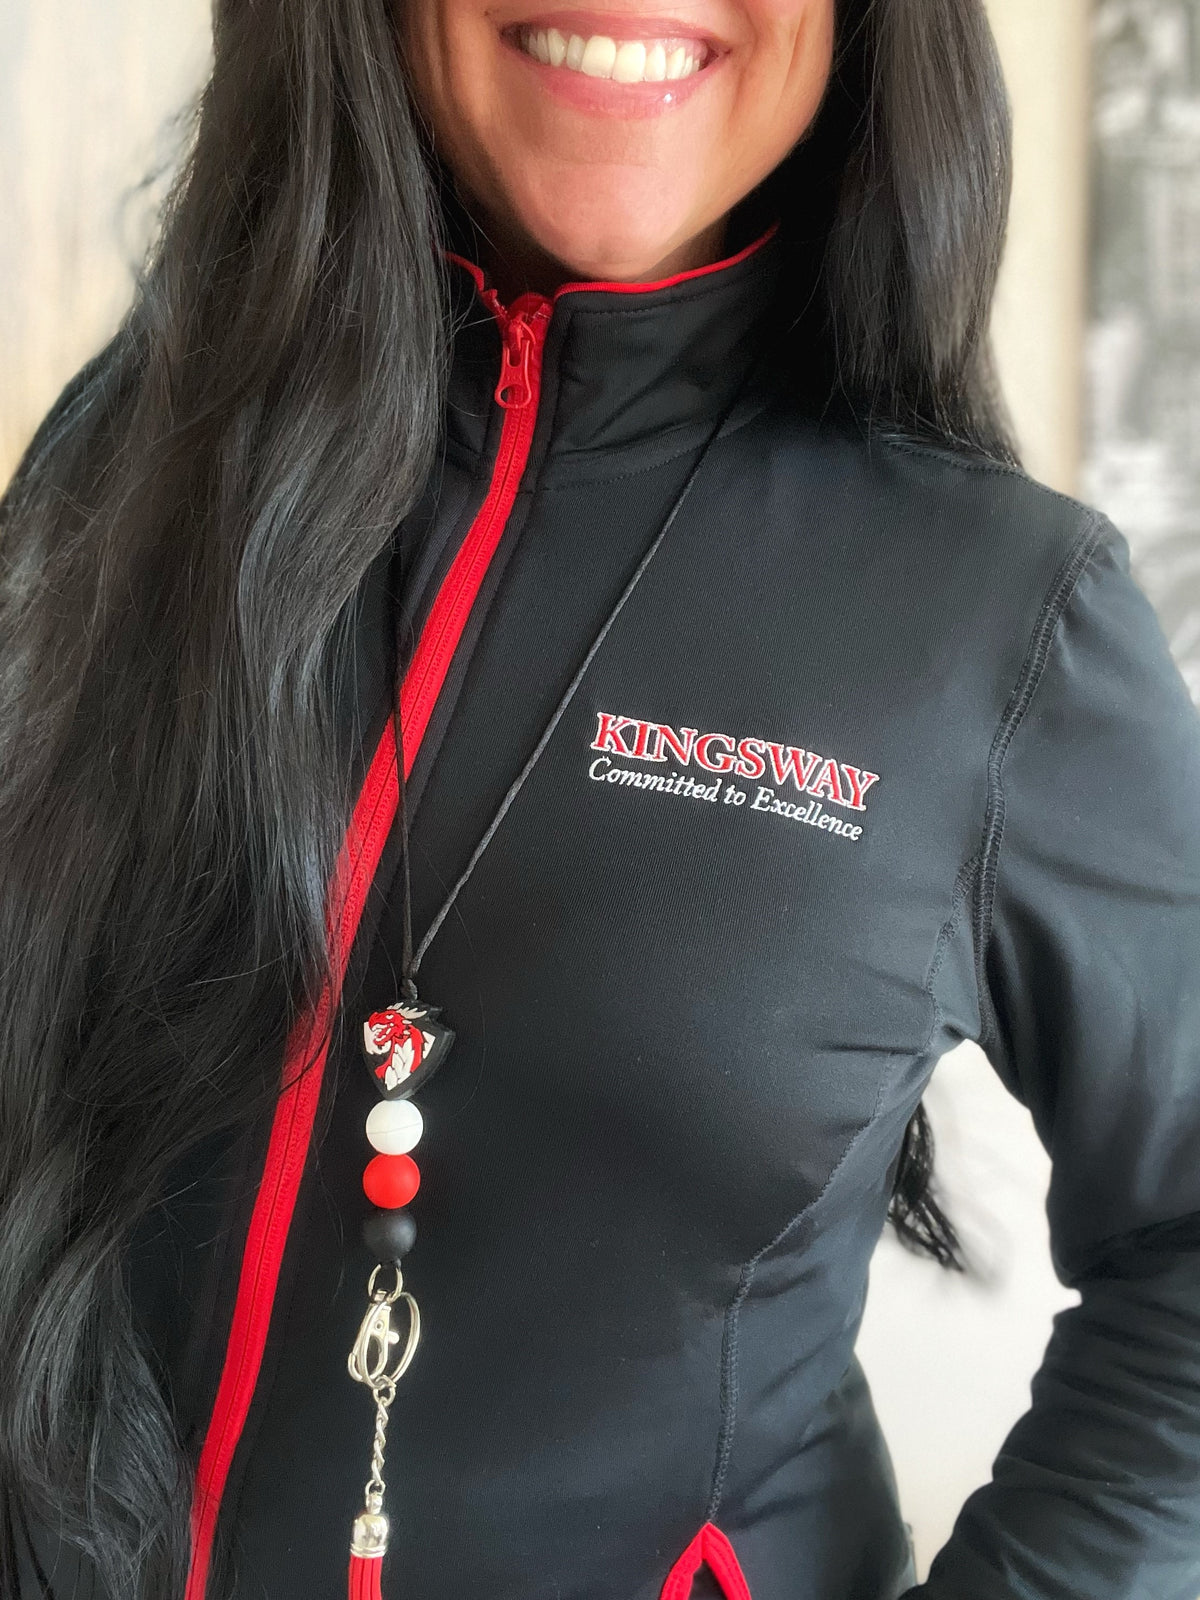 Smiling Woman with dark brown hair wearing a Kingsway Committed to Excellence Jacket and Dragon Lanyard with red Tassel and Black, White, and Red Silicone Beads and Lobster Clasp